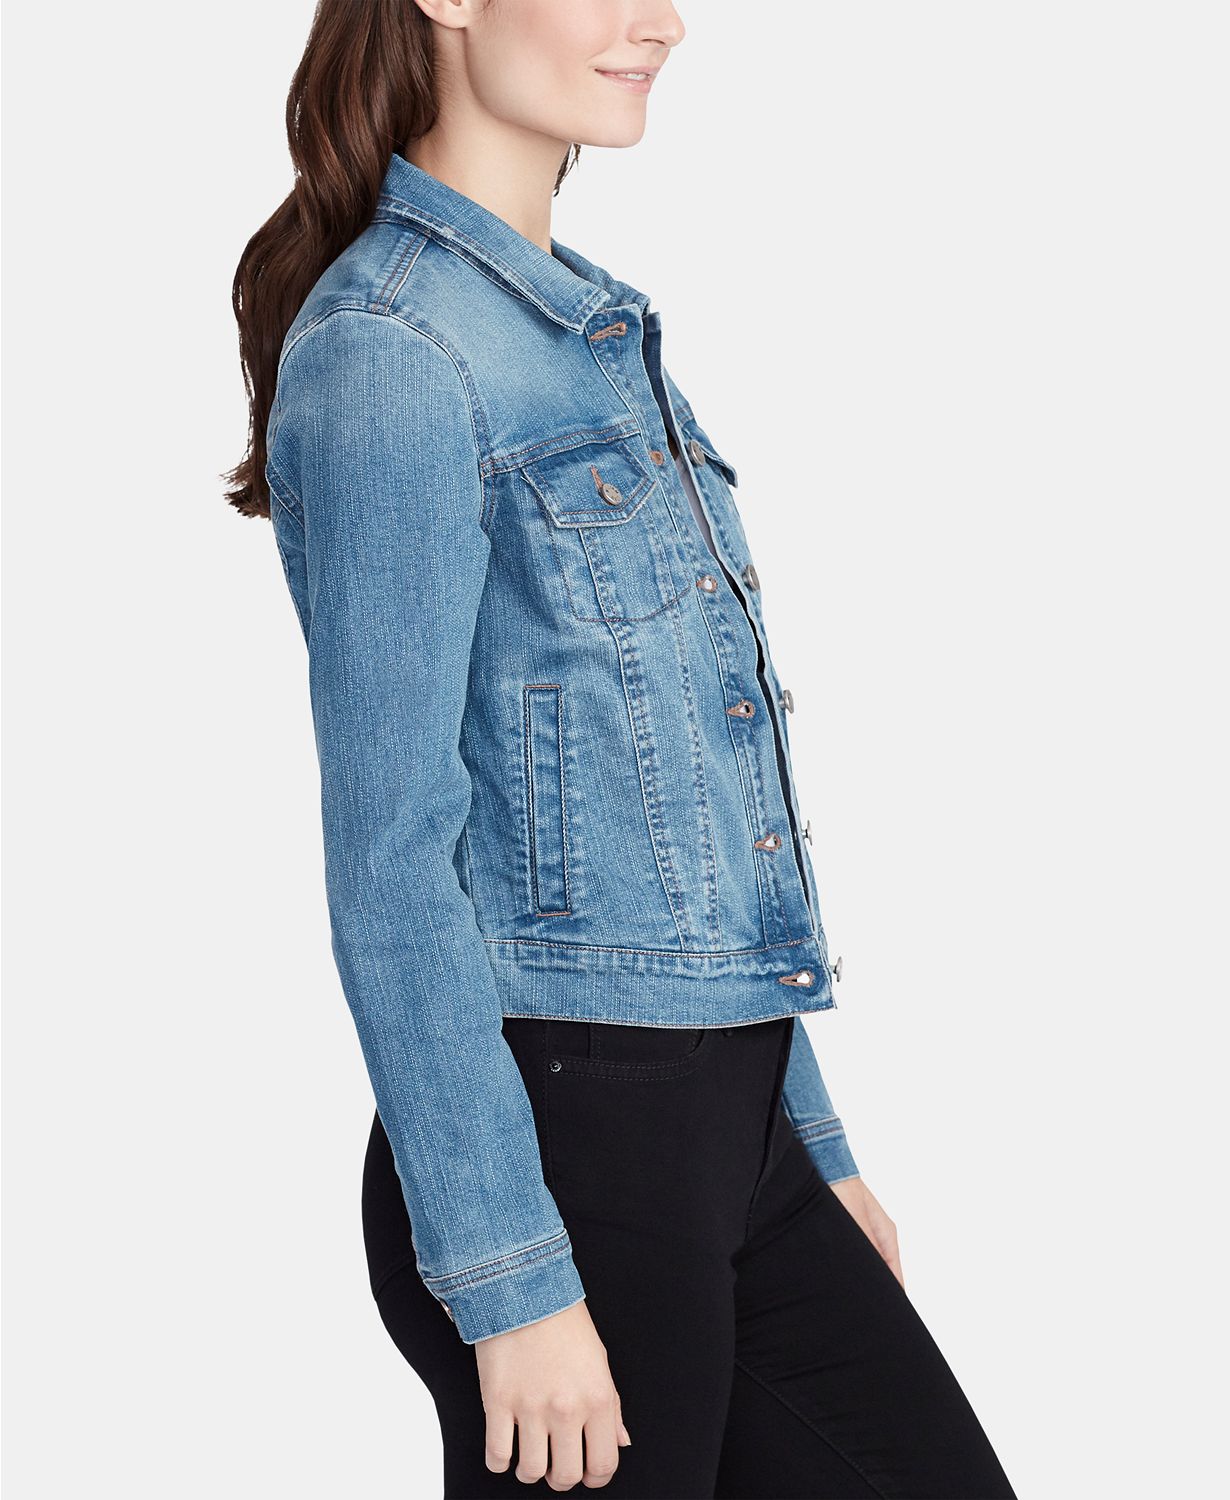 Come discover these Over 50 Fashion: Running Errands Comfy Cute Pieces! William Rast Denim Jacket is a classic layering piece for casual outfits. #fashionover50